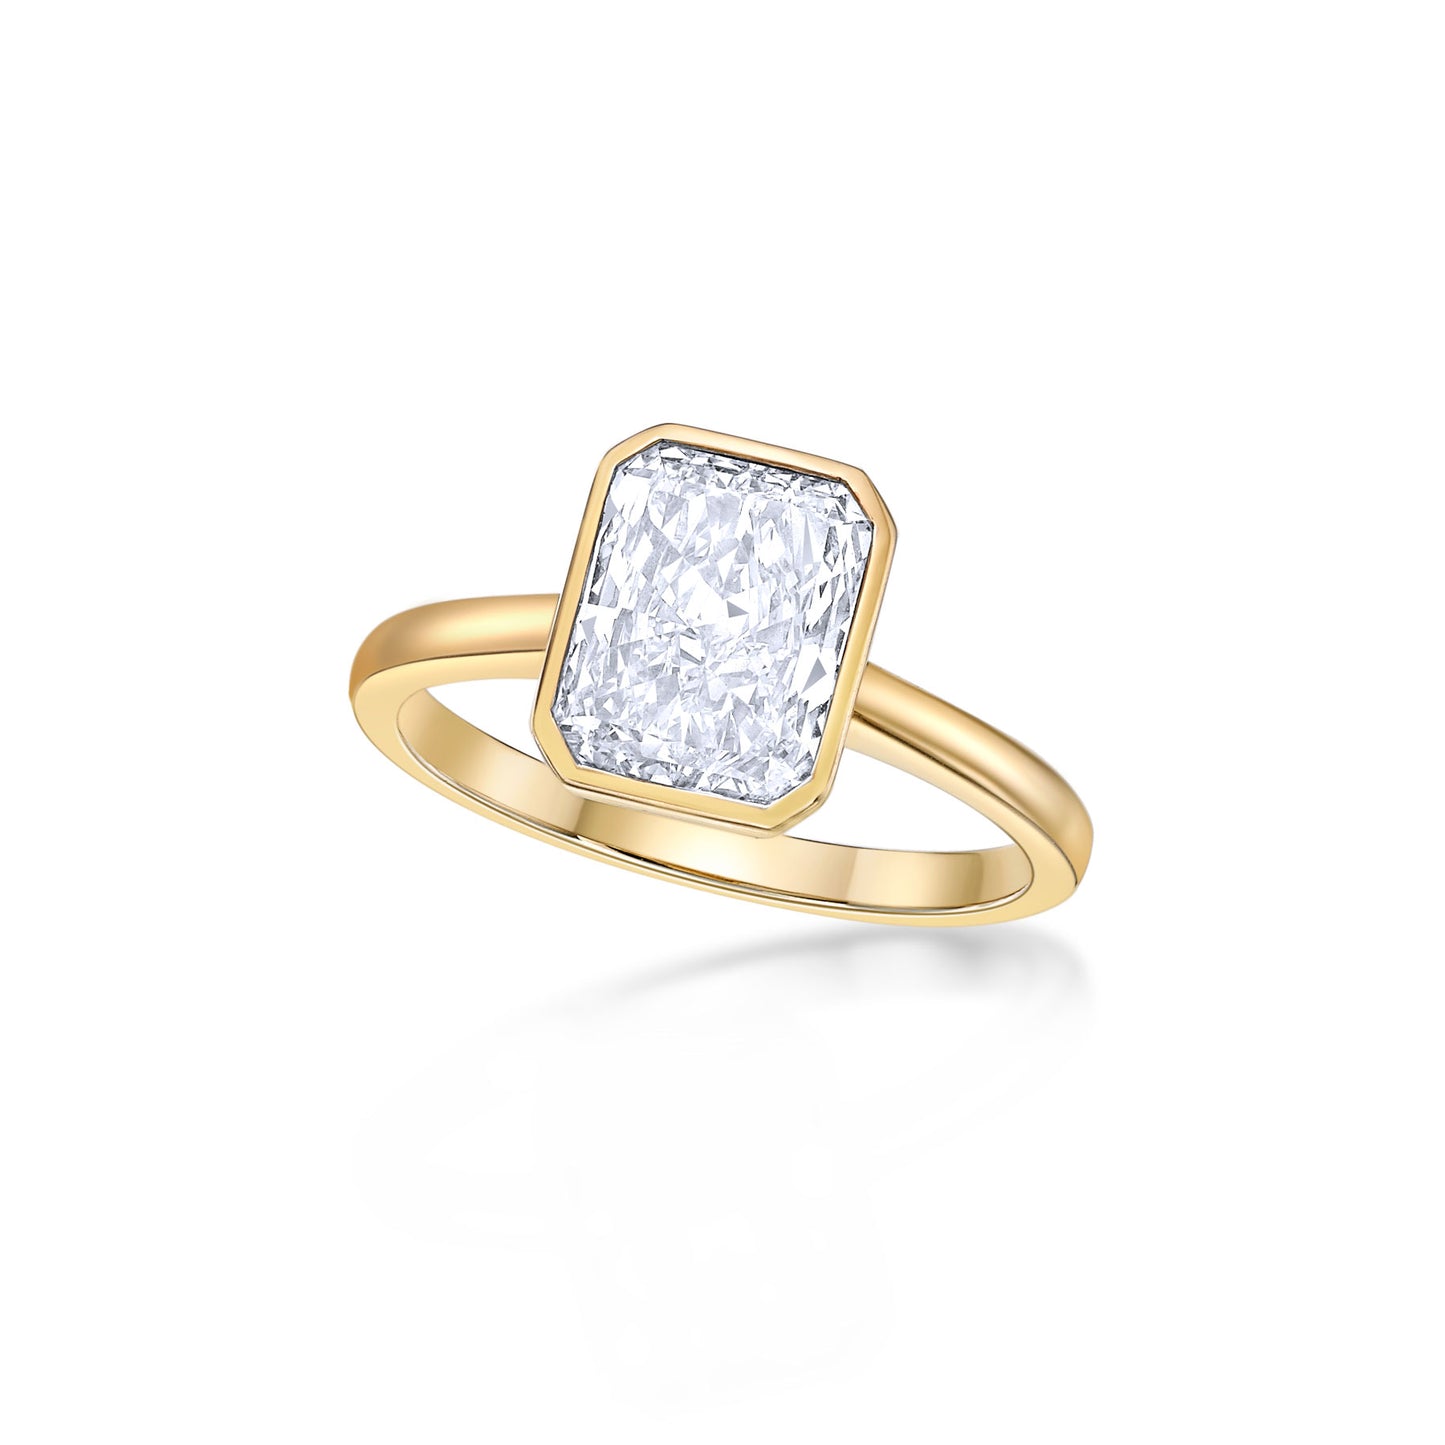 2.17ct Radiant Cut Diamond in a handmade 18K Yellow Gold Bezel Solitaire Setting